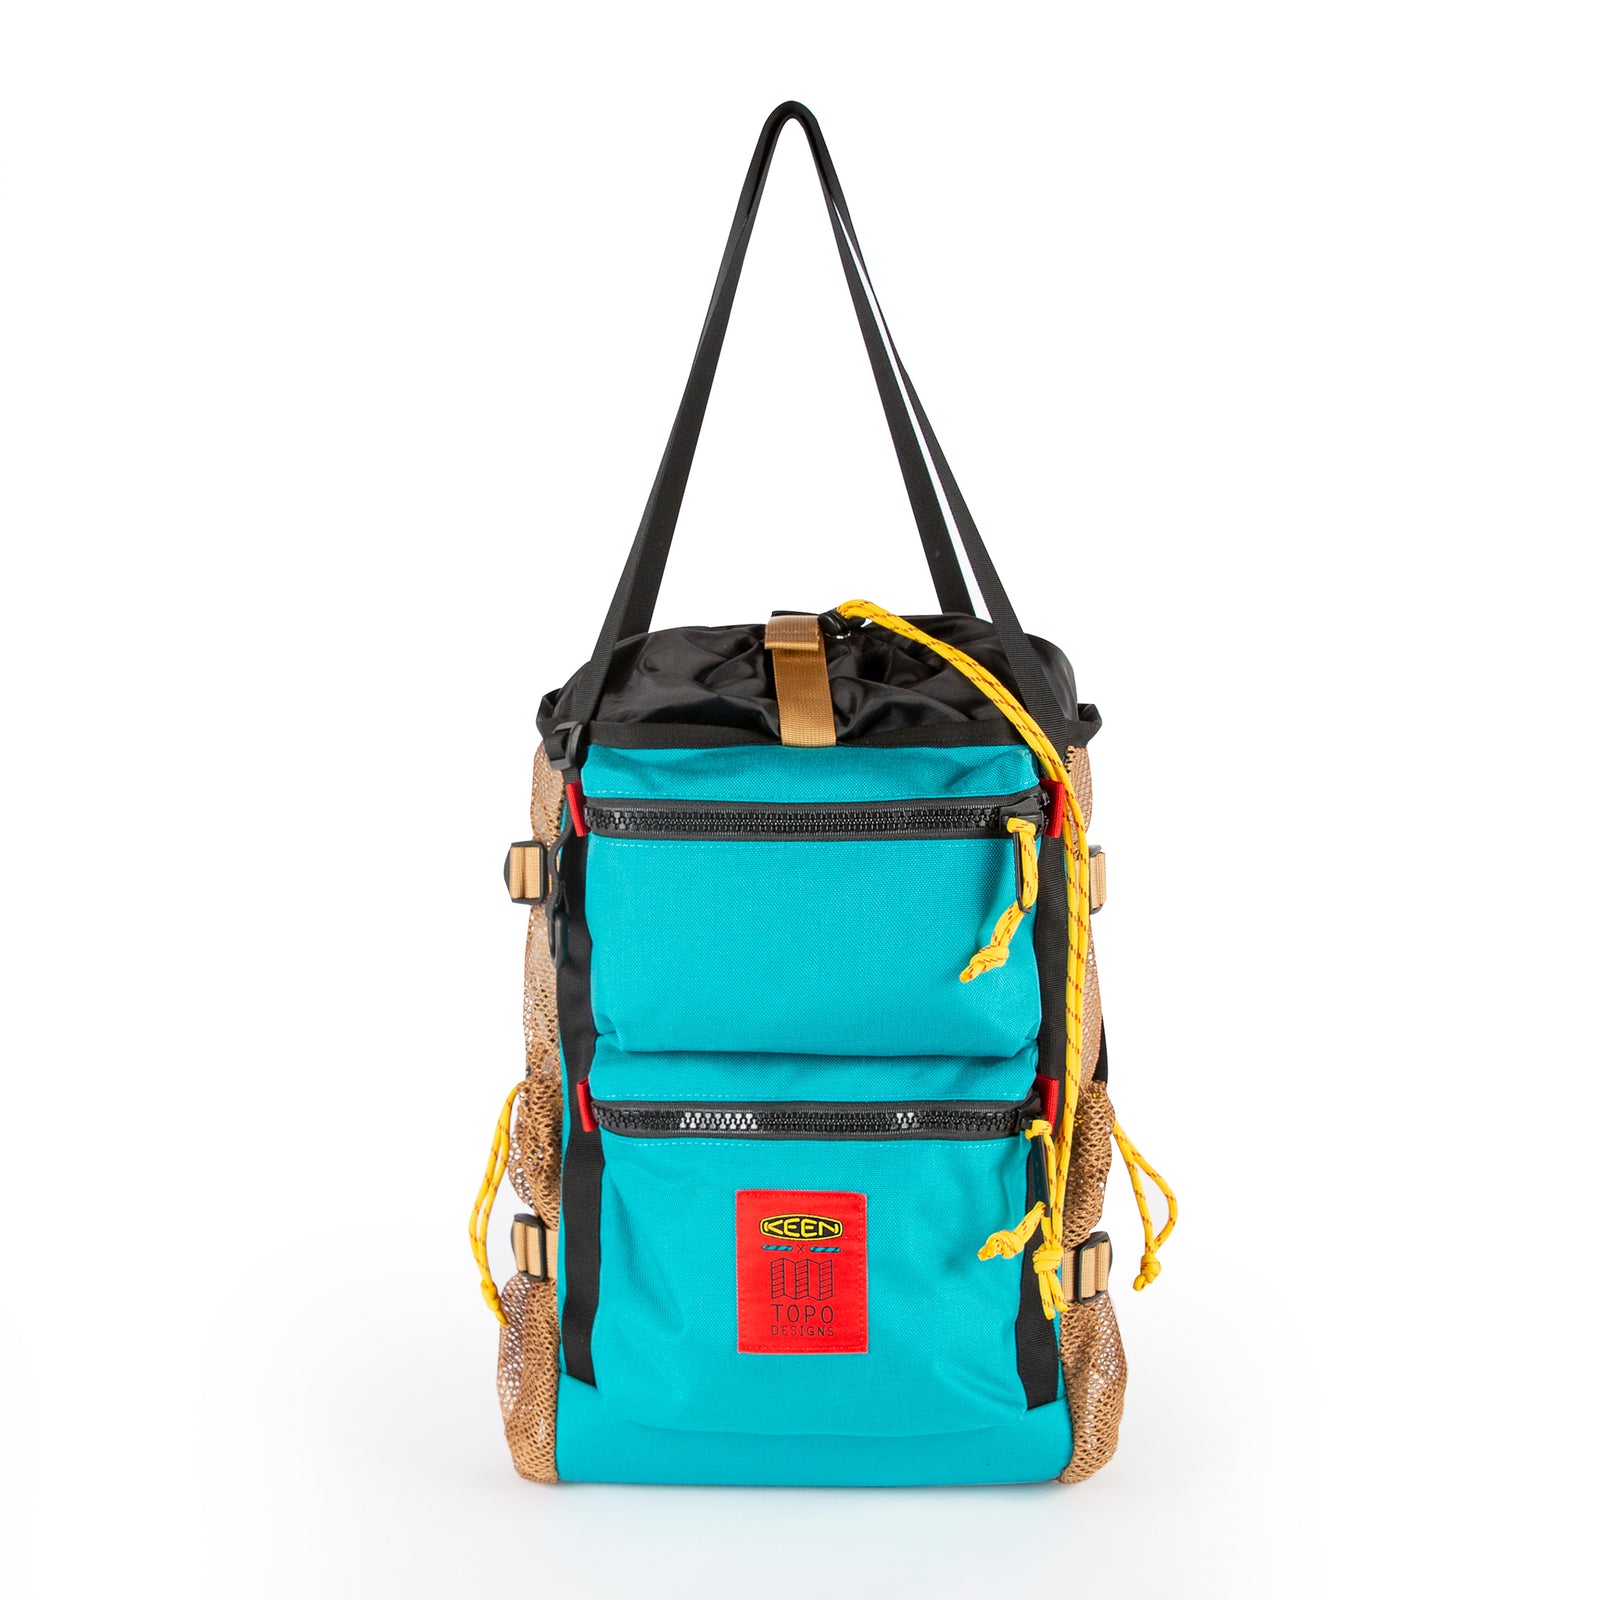 Topo Designs x Keen River Backpack Tote bag in Turquoise showing shoulder straps